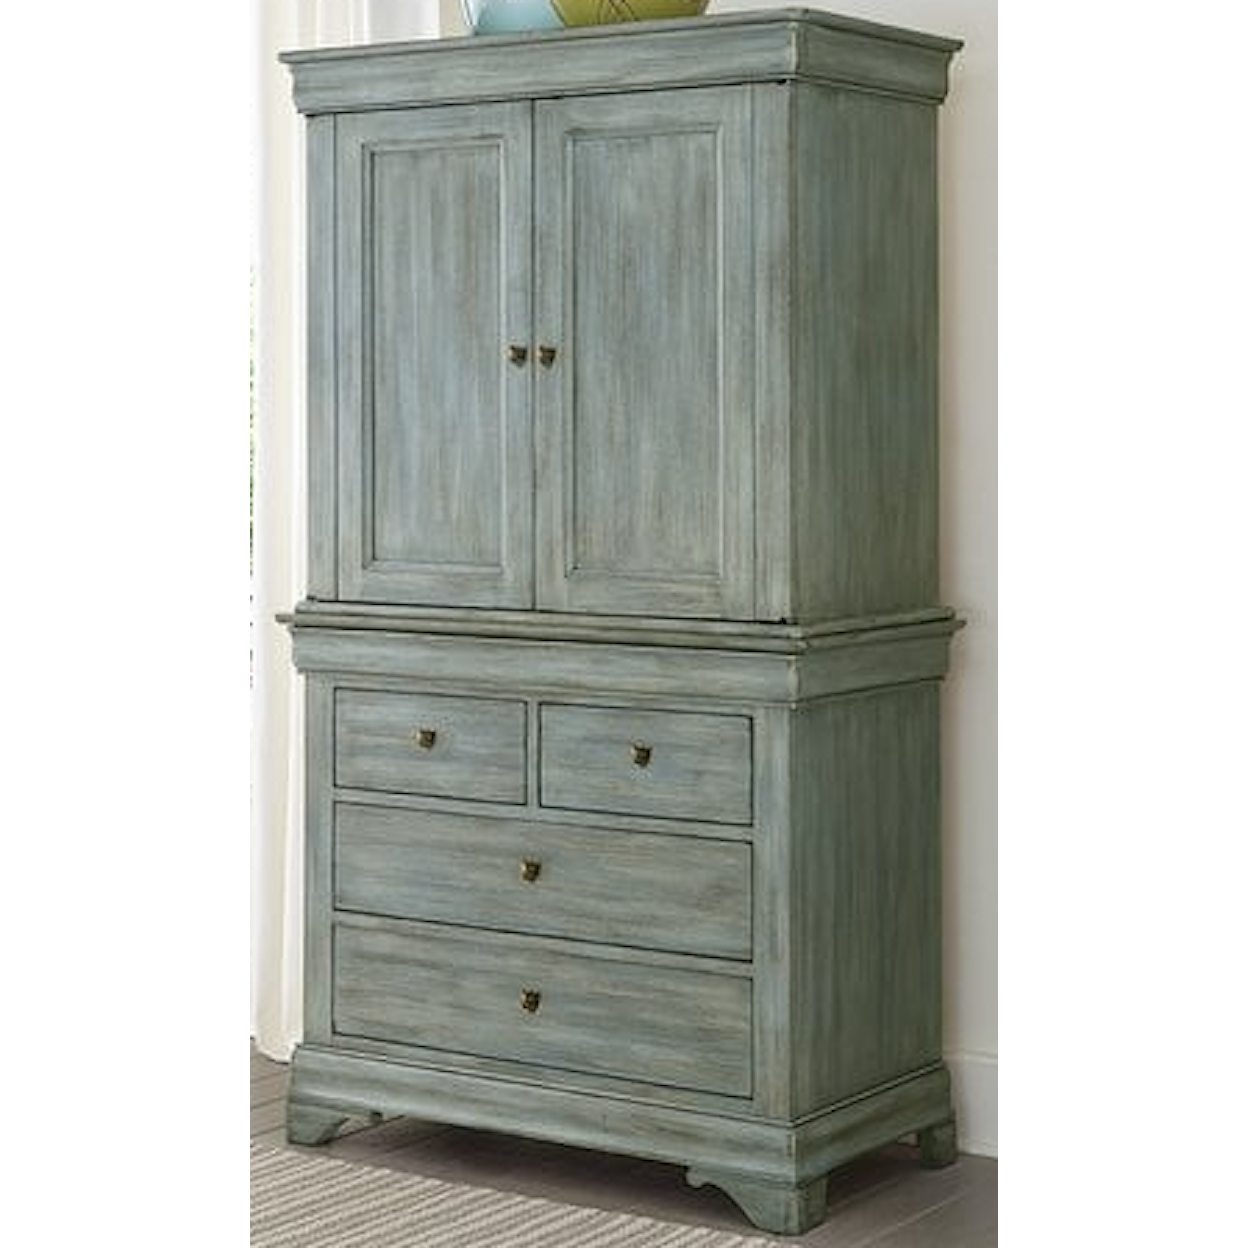 Durham Chateau Fontaine Junior Chest with Door Deck